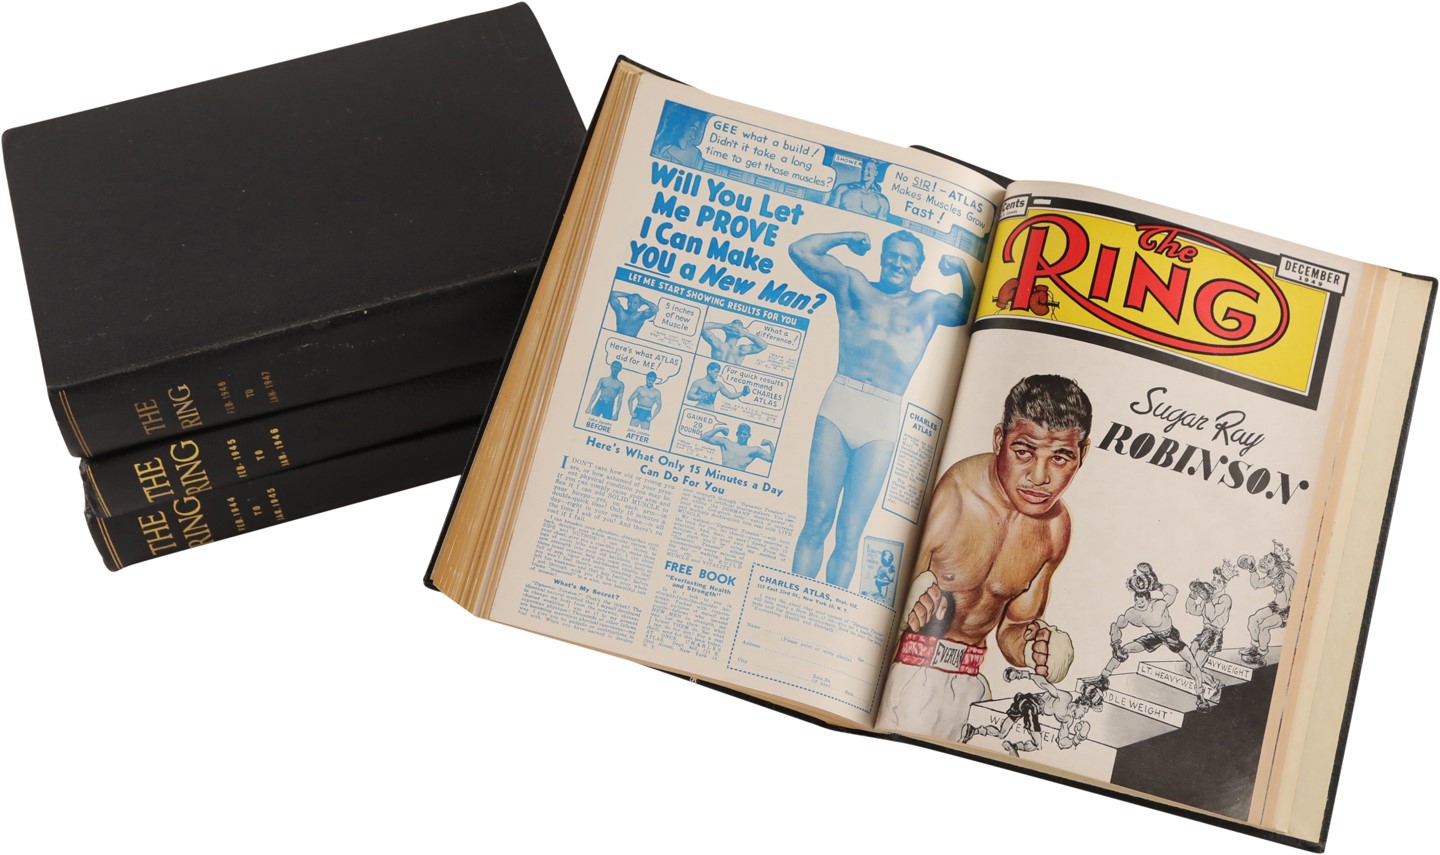 Muhammad Ali & Boxing - Collection of The Ring Boxing Magazine Bound Volumes from the 1940s Including (1) Autograph (5)